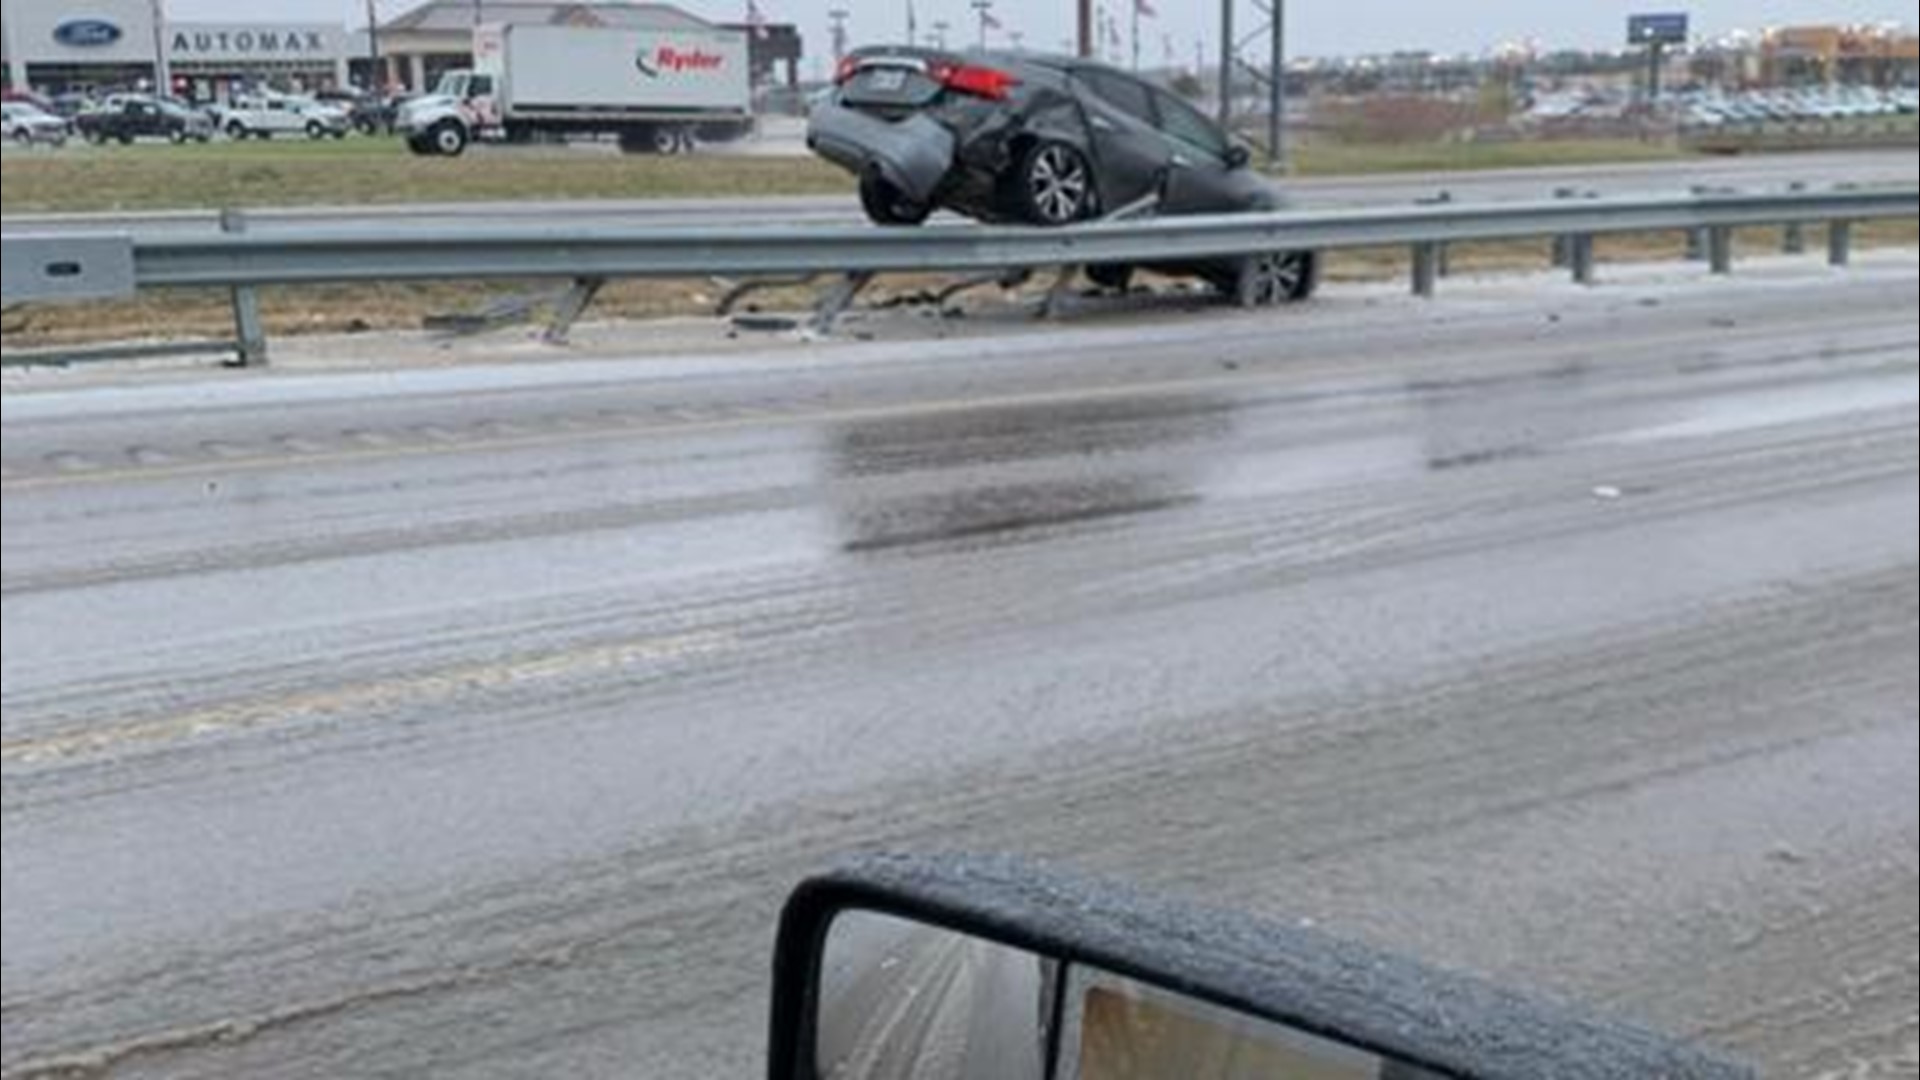 With more icy conditions in the forecast, it is especially important to drive safely if you must be on the road.